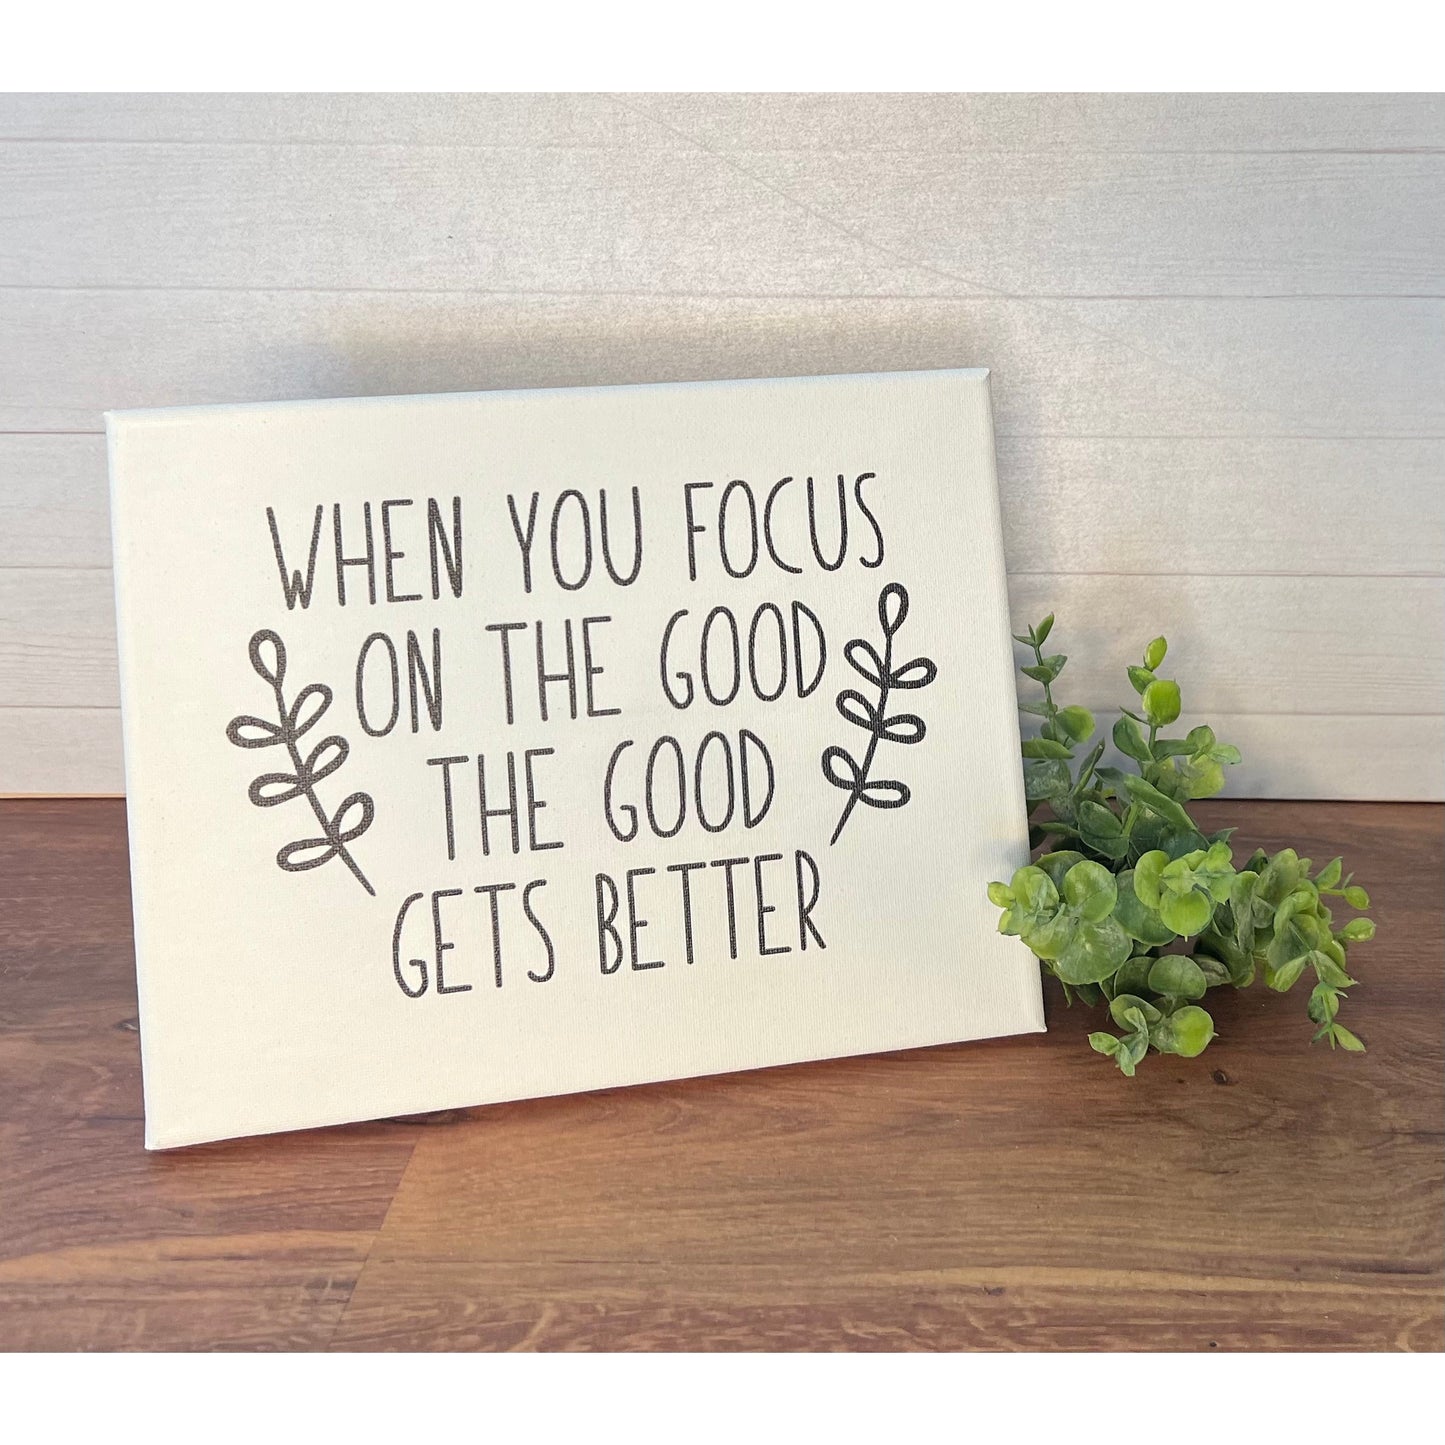 Focus On The Good Sign